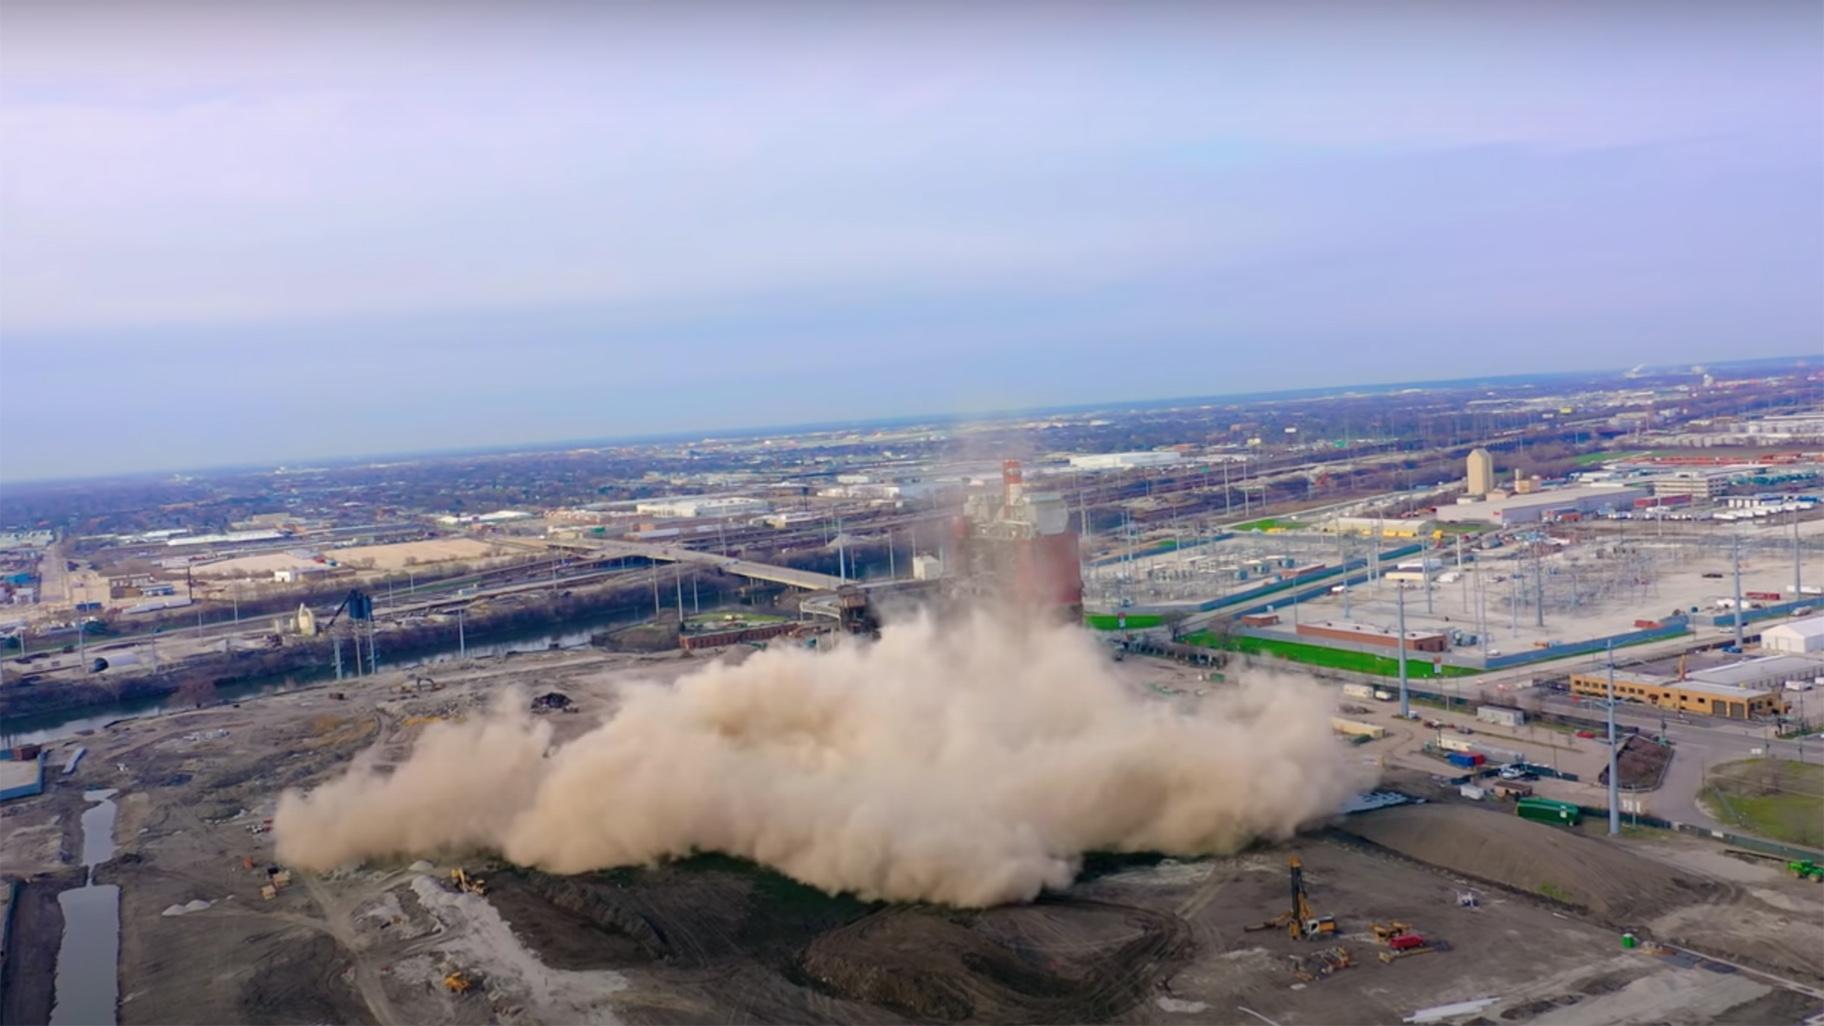 A still image from a video taken of the demolition of the Crawford Coal Plant smokestack, April 11, 2020. (Alejandro Reyes / YouTube)